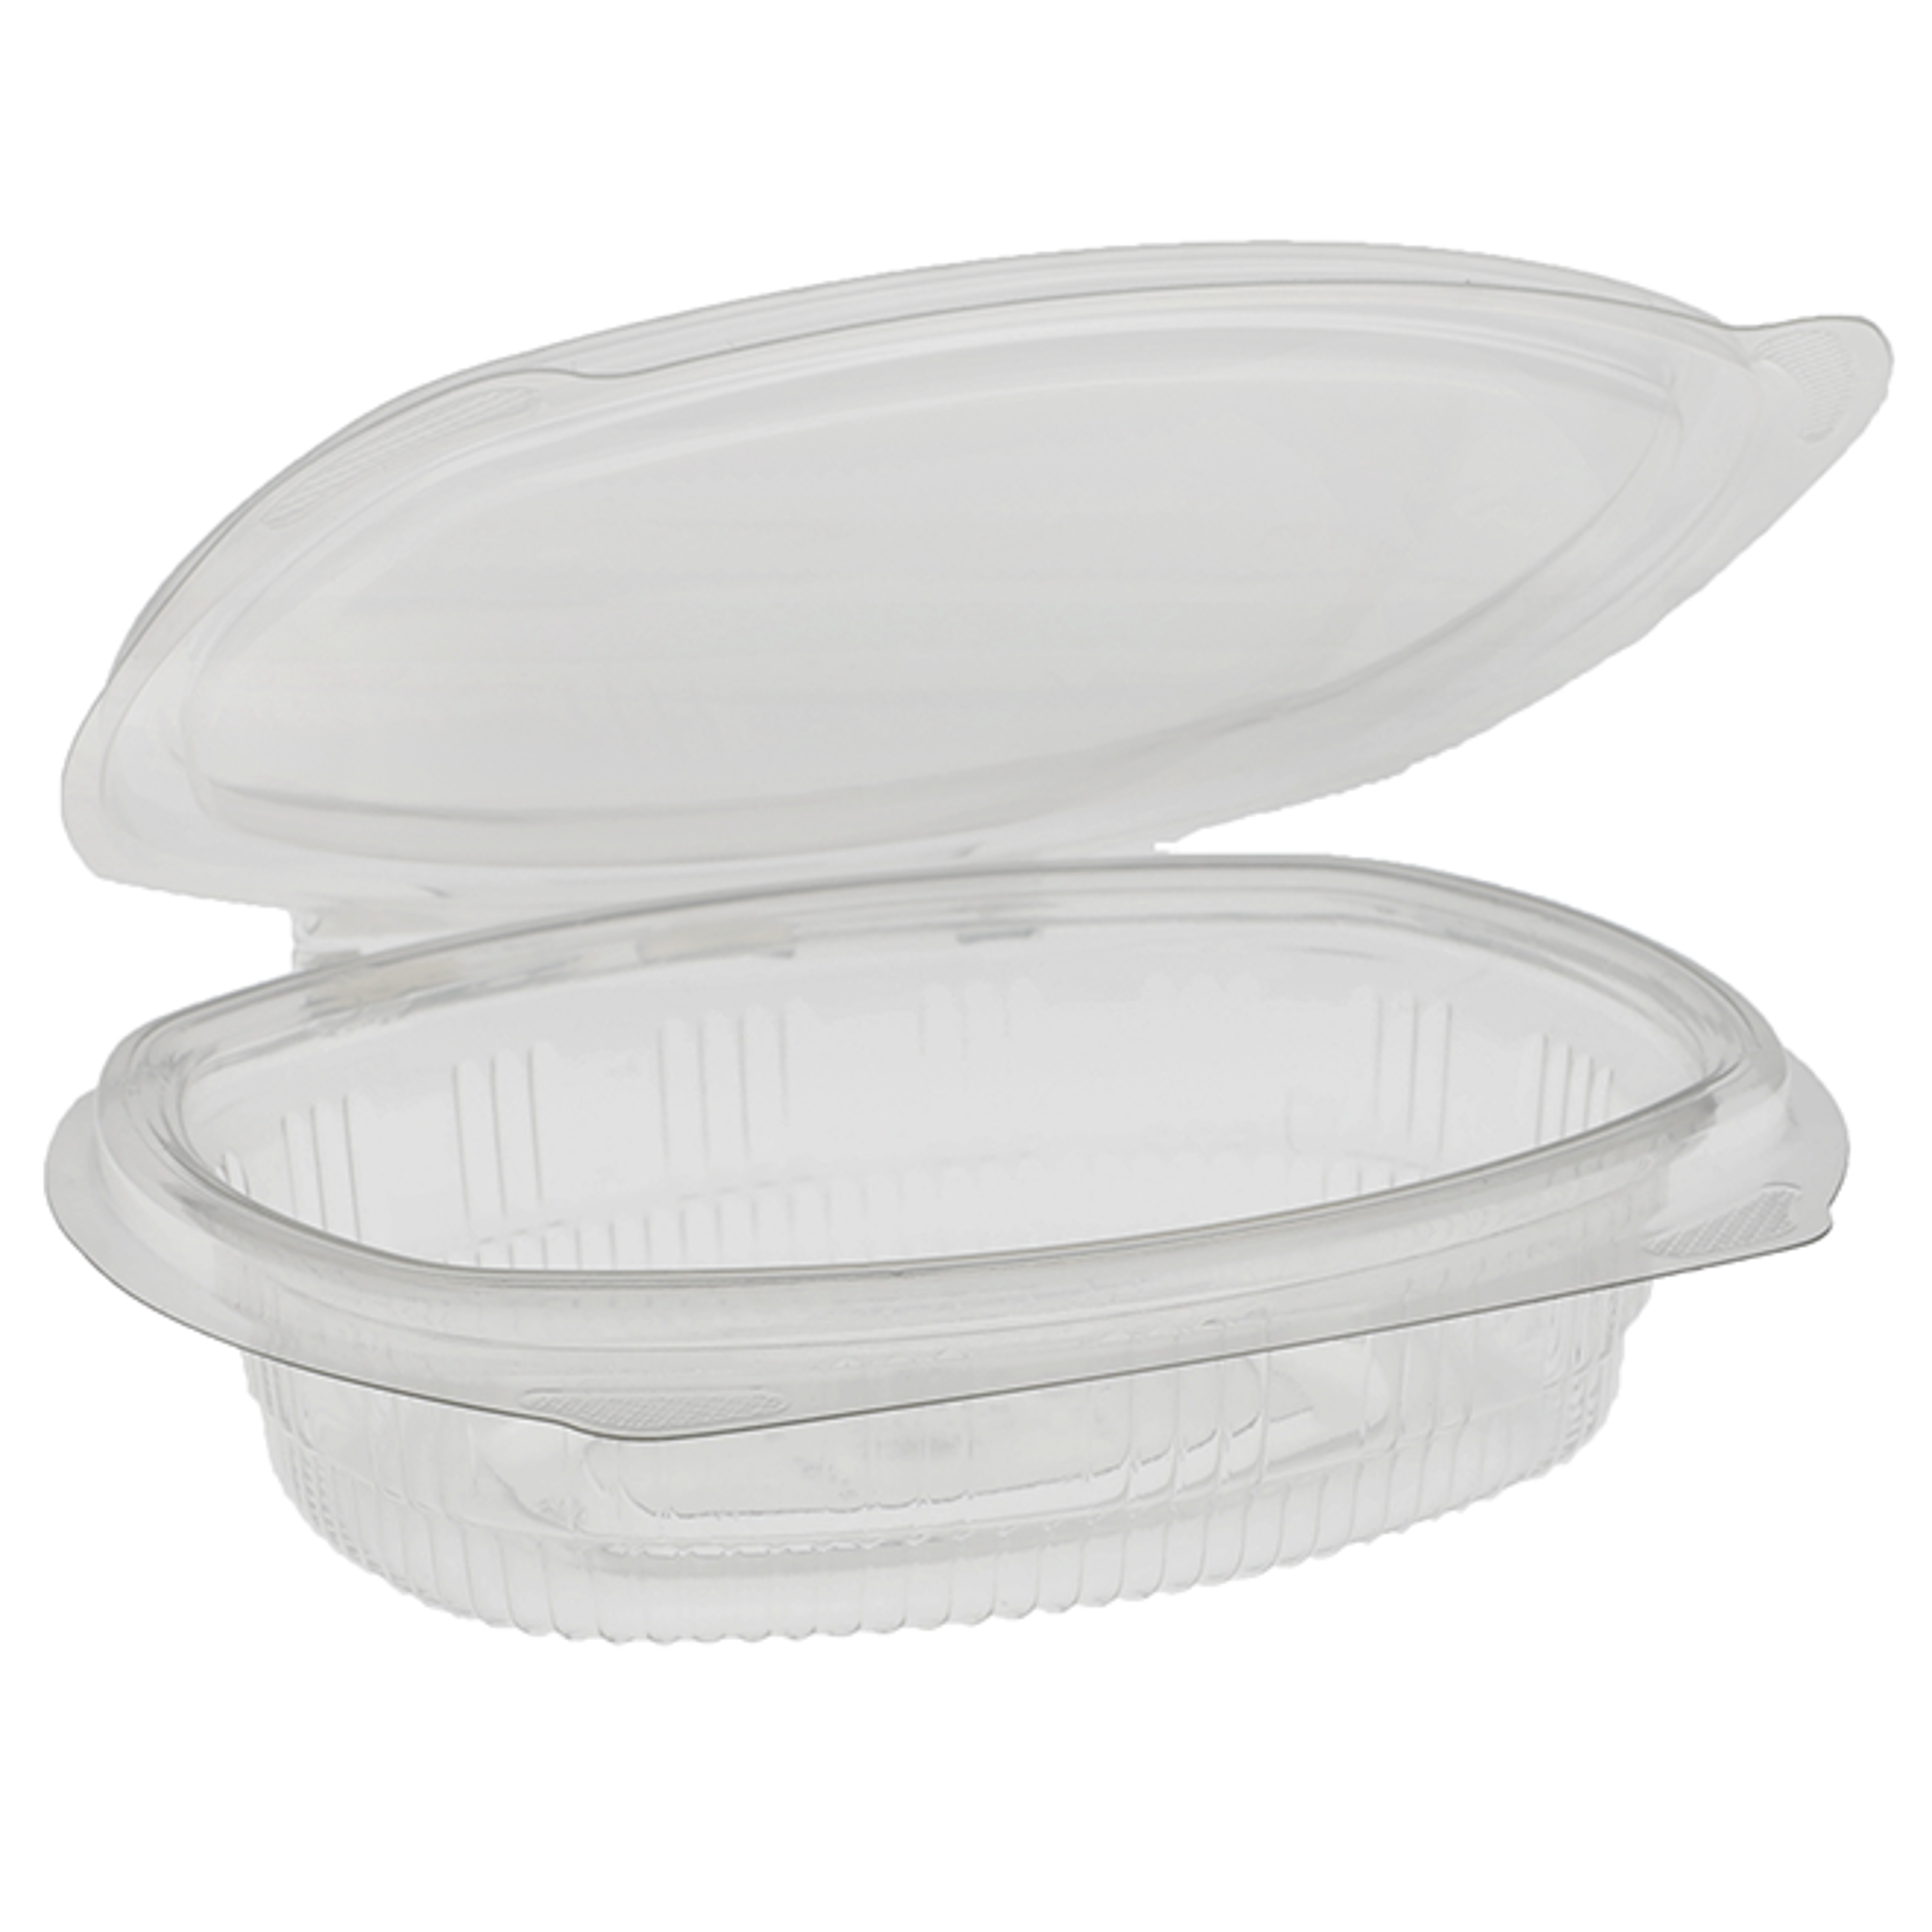 OctaView Hinged-Lid Hot Food Containers by SOLO® SCC809011PP94